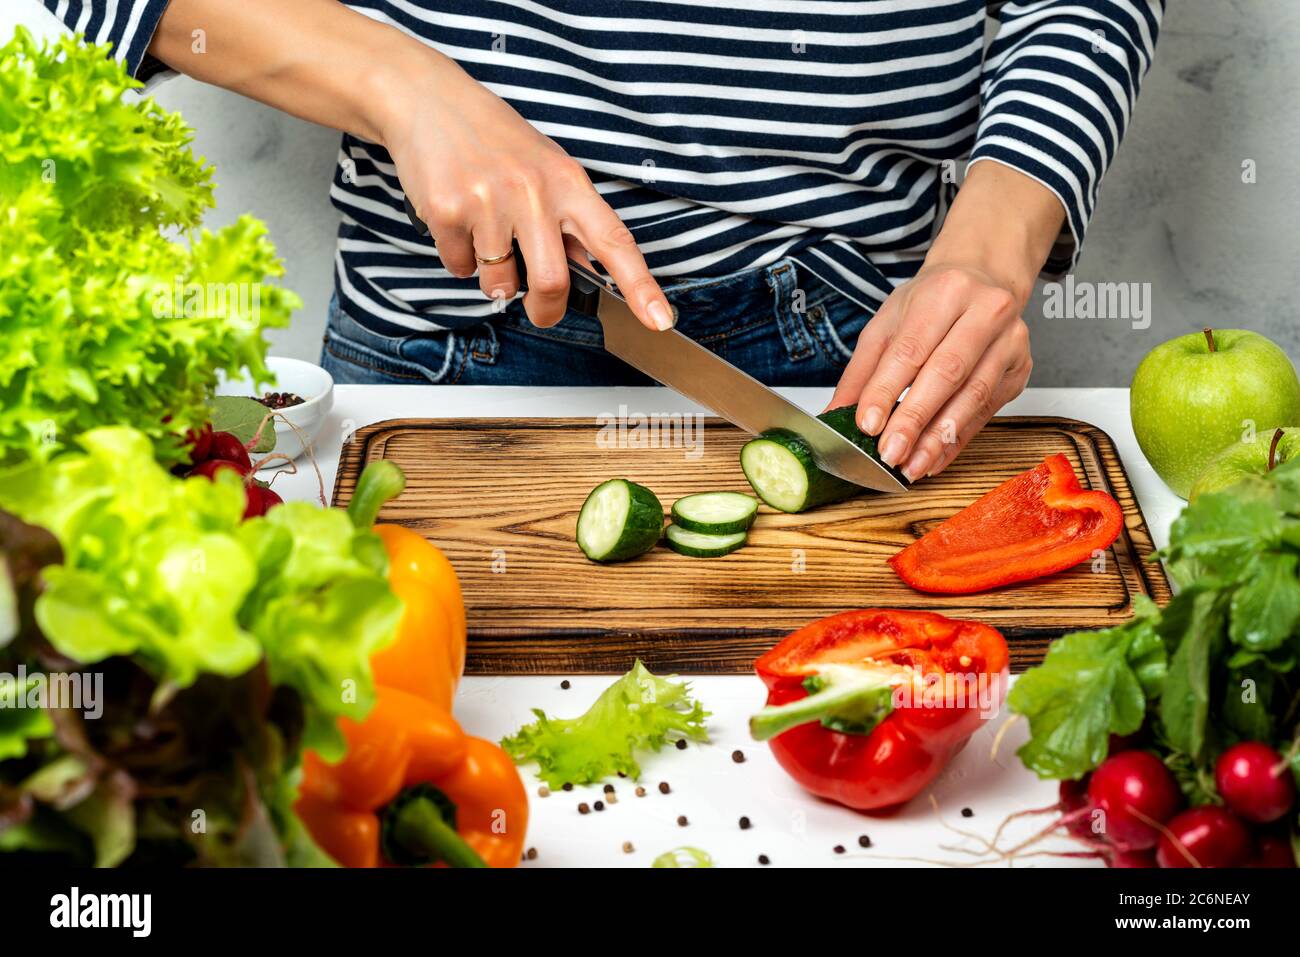 https://c8.alamy.com/comp/2C6NEAY/woman-cutting-vegetables-in-the-kitchen-cooking-healthy-diet-food-concept-2C6NEAY.jpg